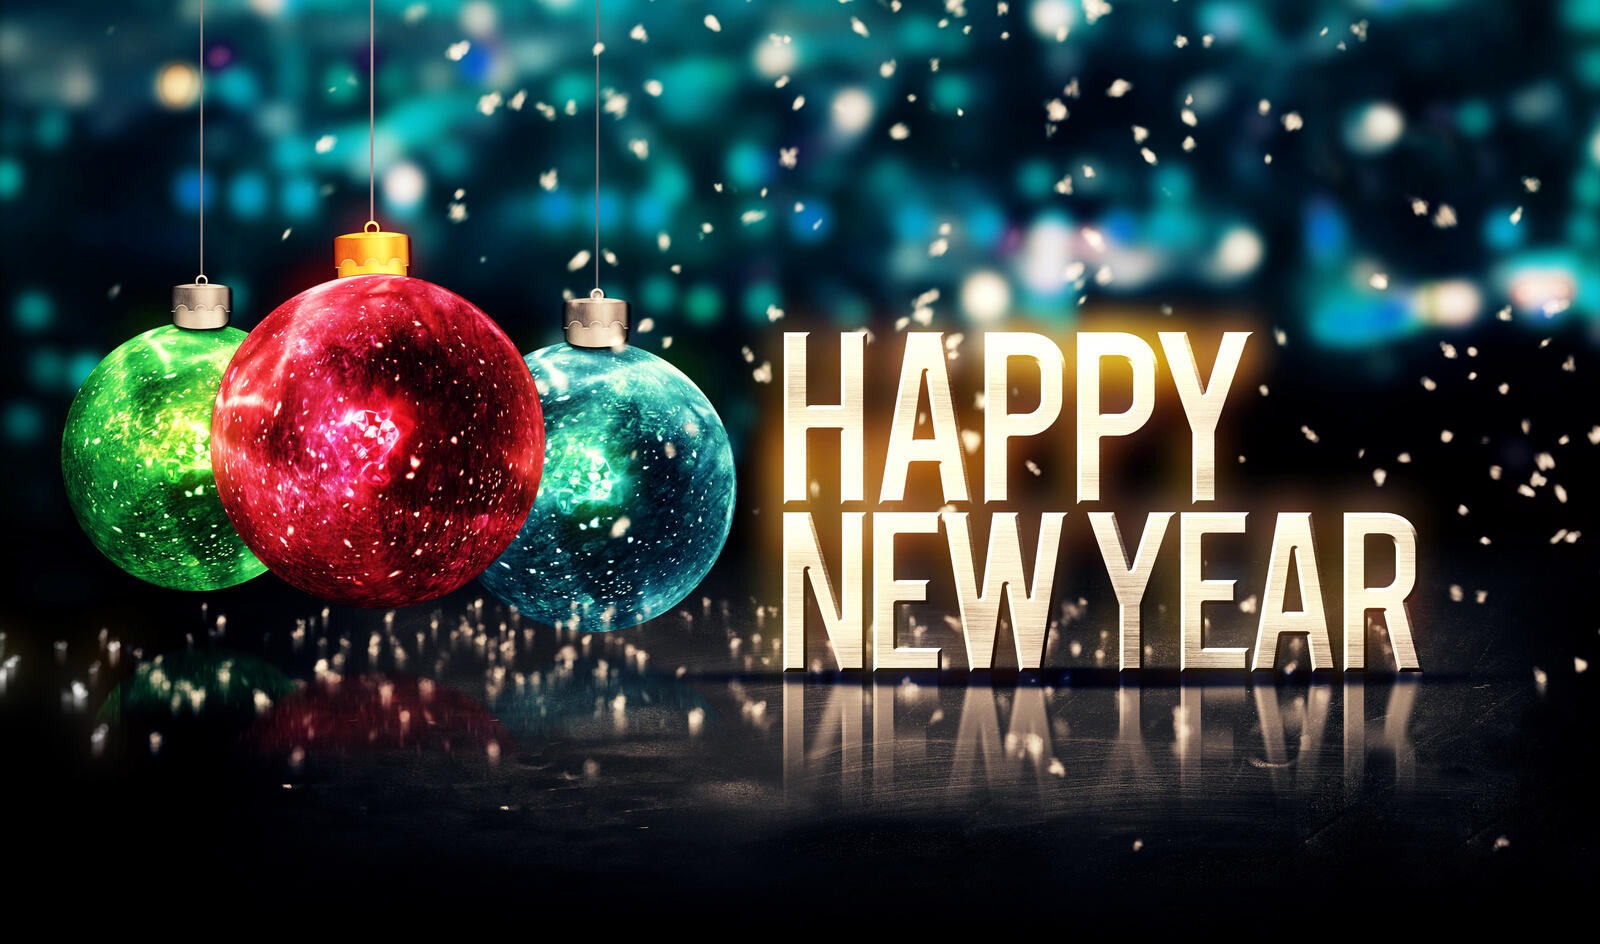 Wallpapers Happy New Year new year congratulation on the desktop